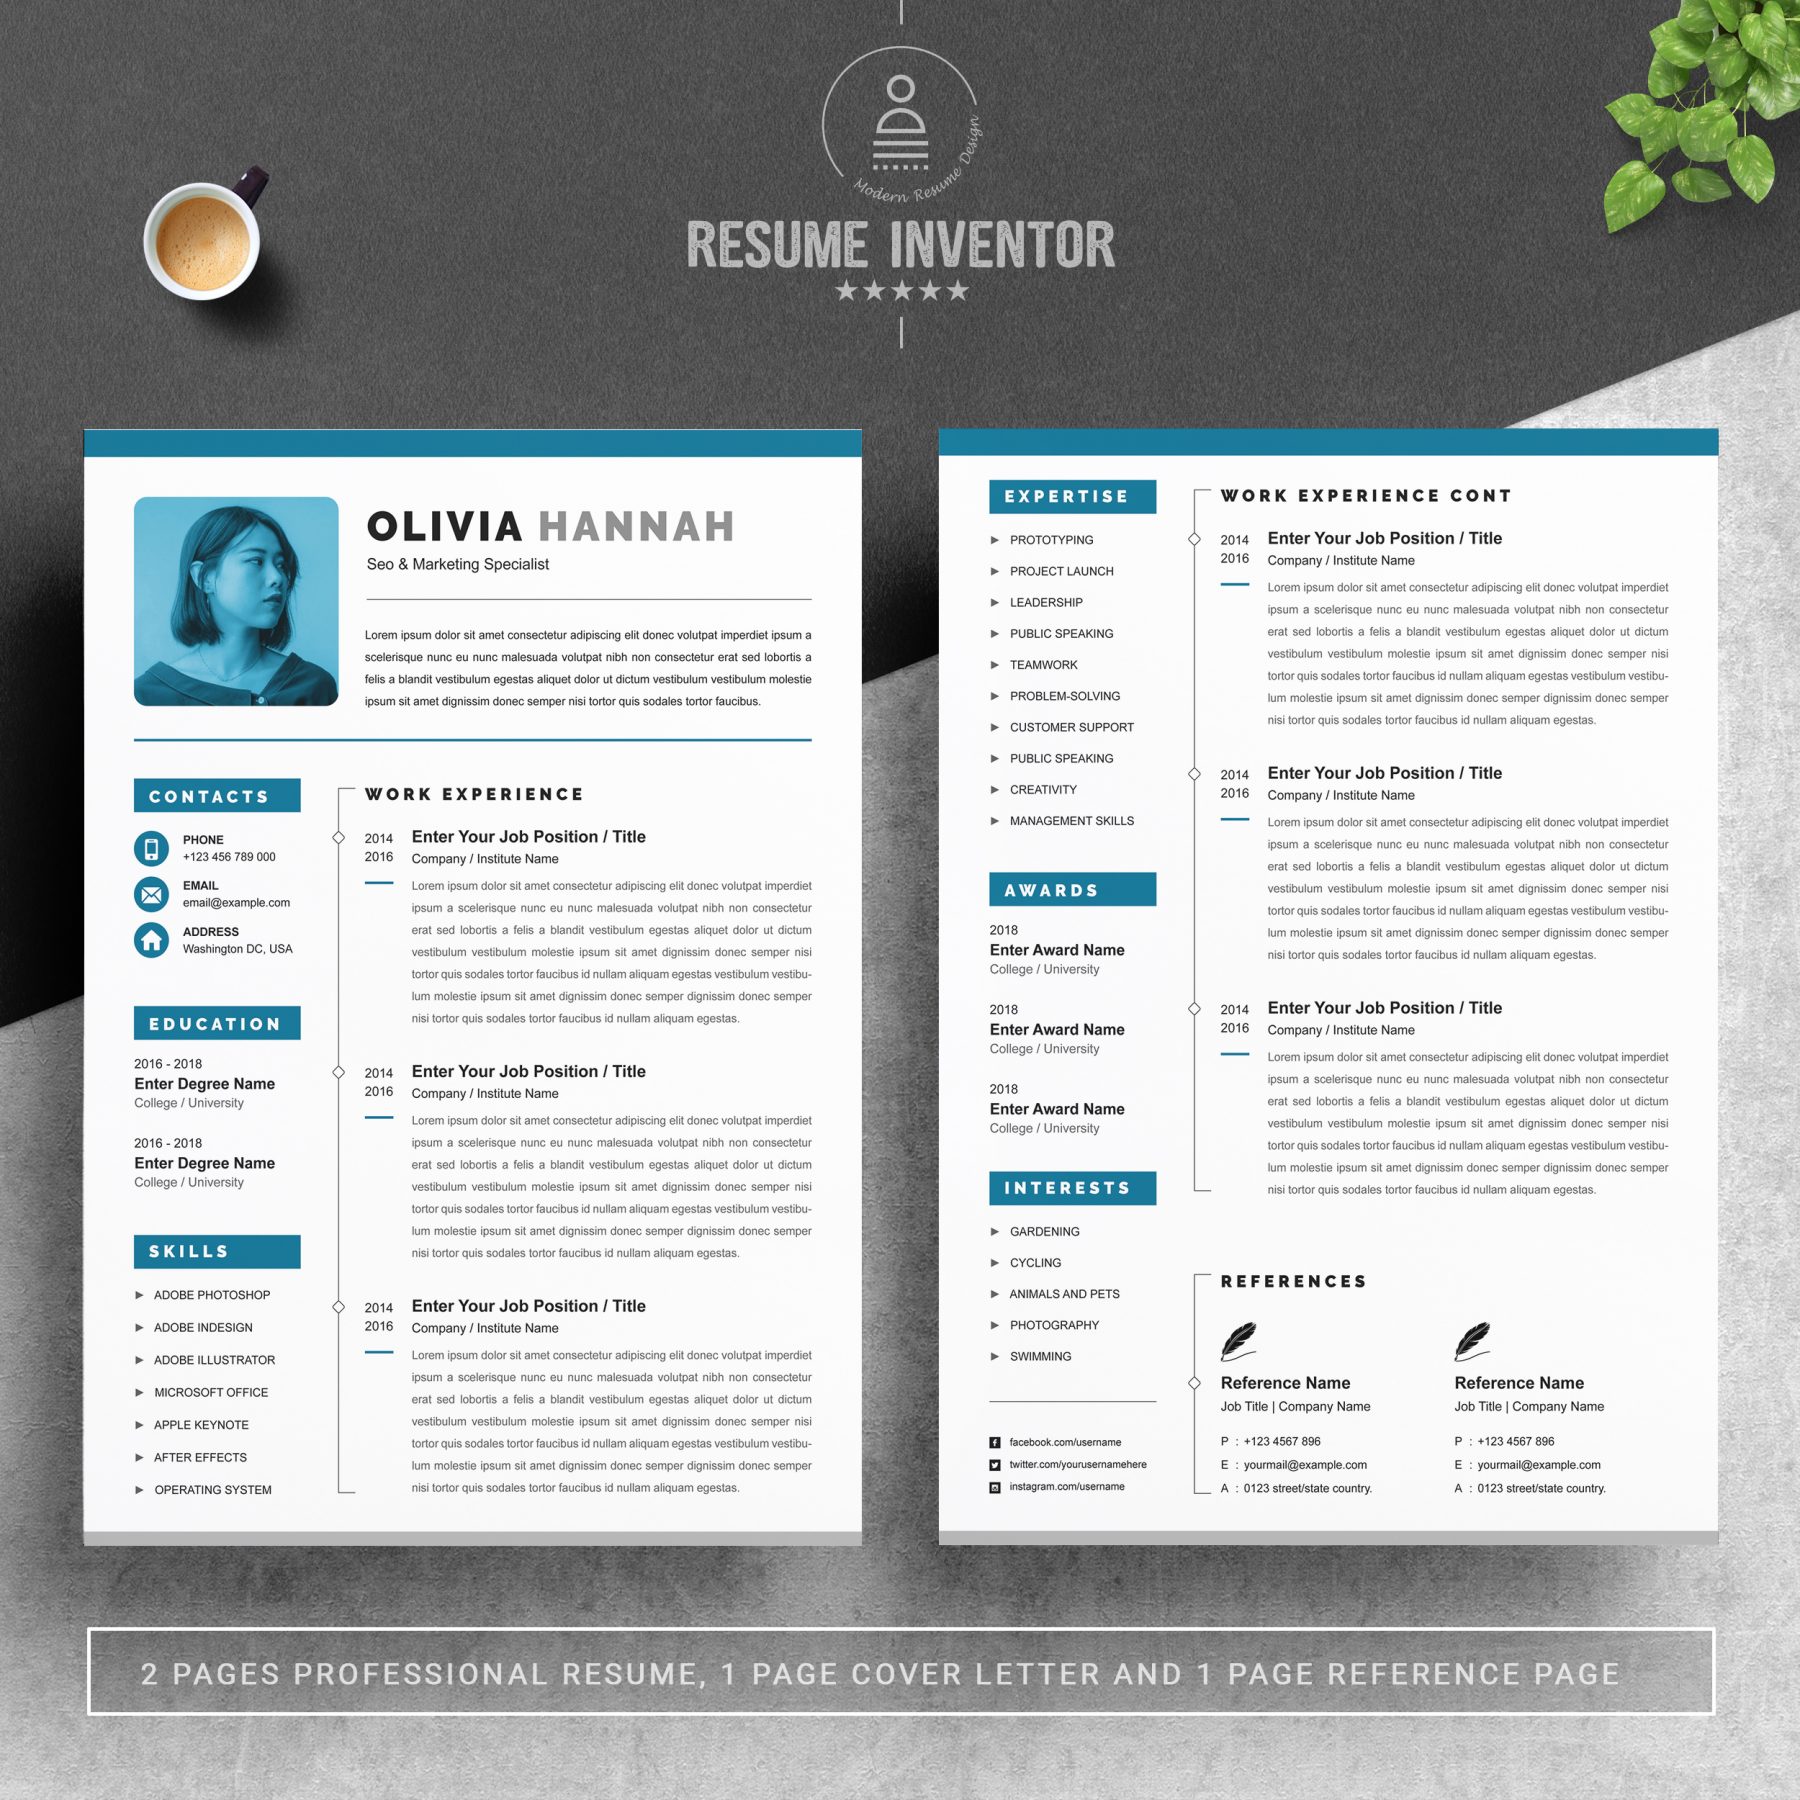 Word, Pages, InDesign Resume Design